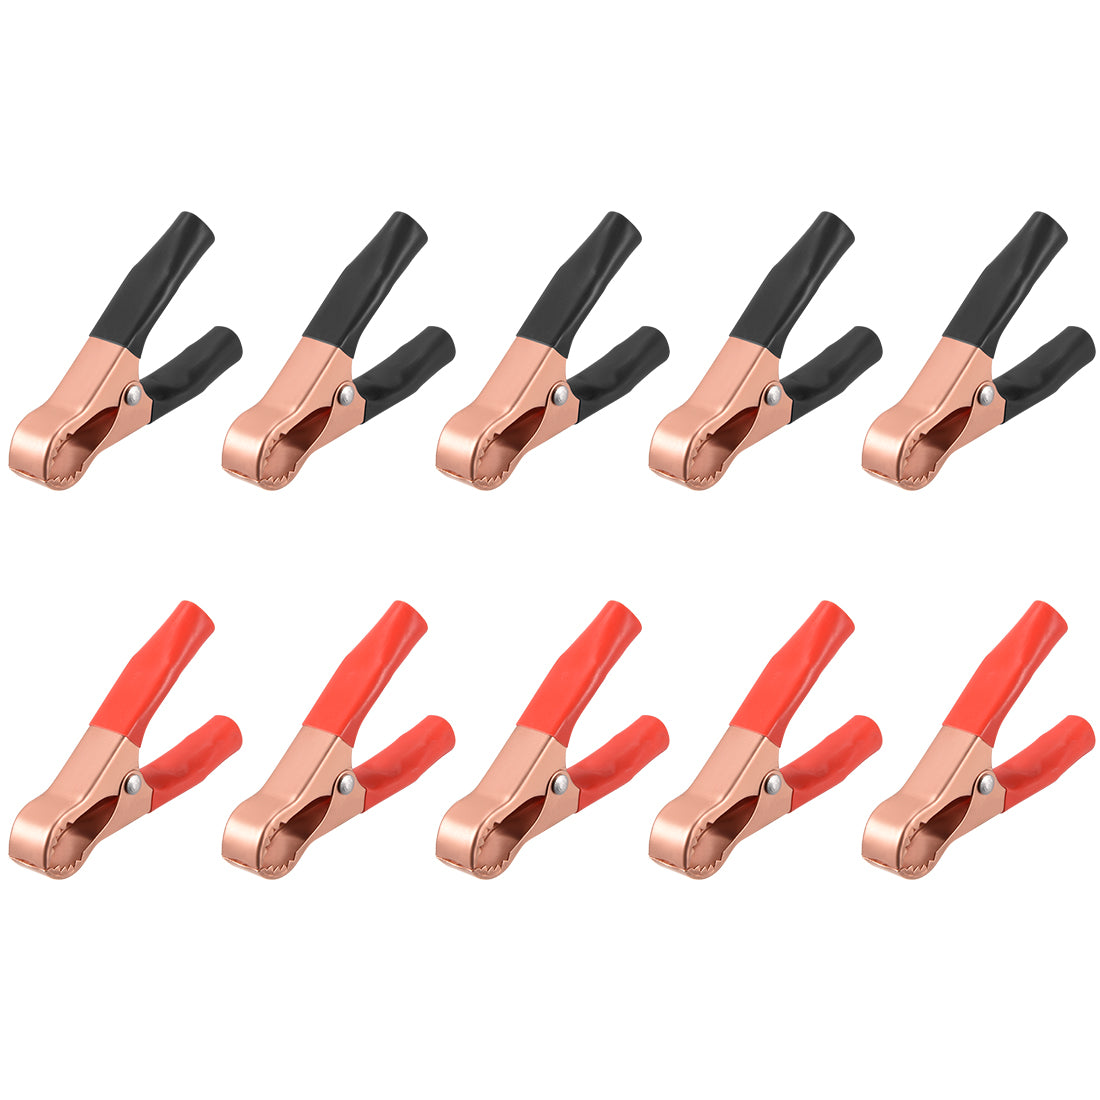 uxcell Uxcell 10 Pcs Copper Coated Alligator Clip Adapter 50A Test Clamp Half Shroud Red Black